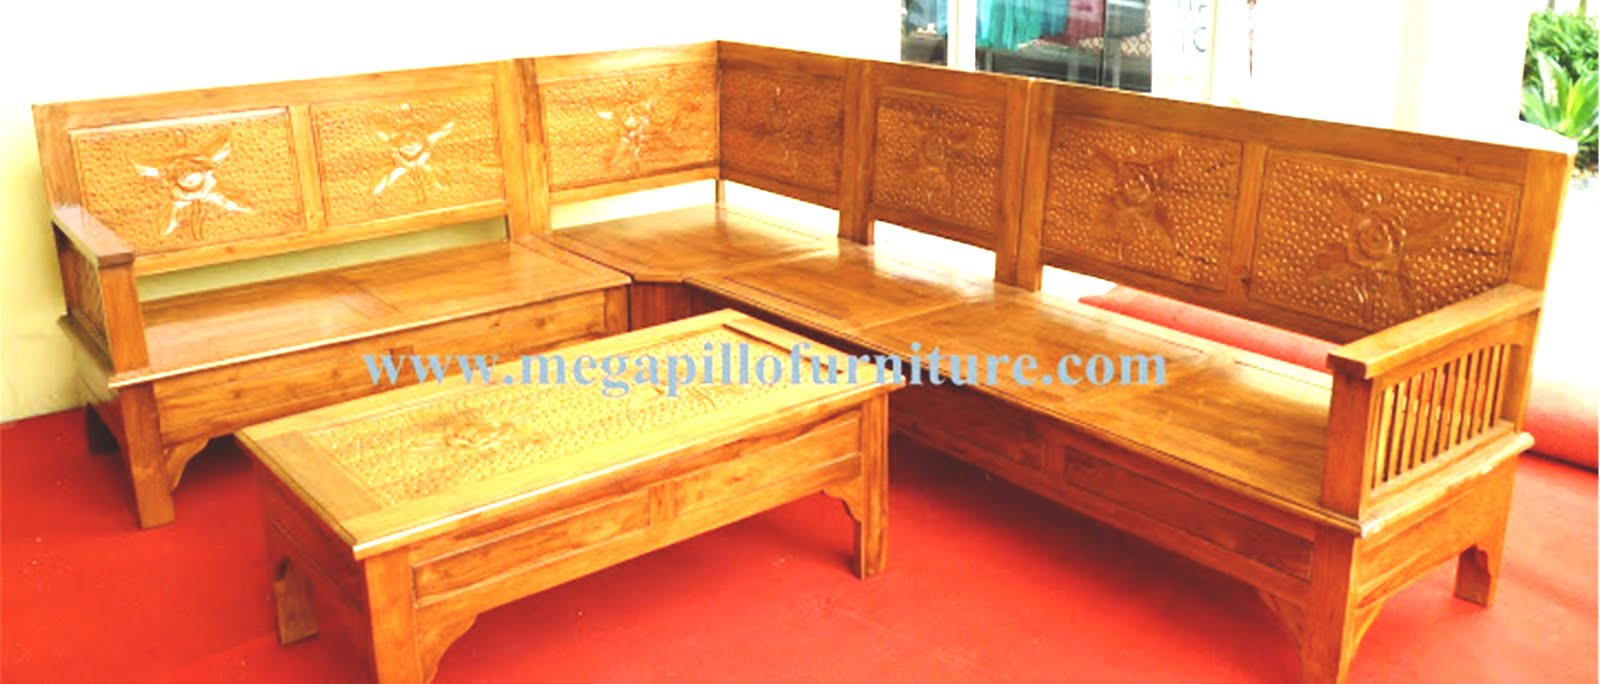 Finest Quality Furnitures